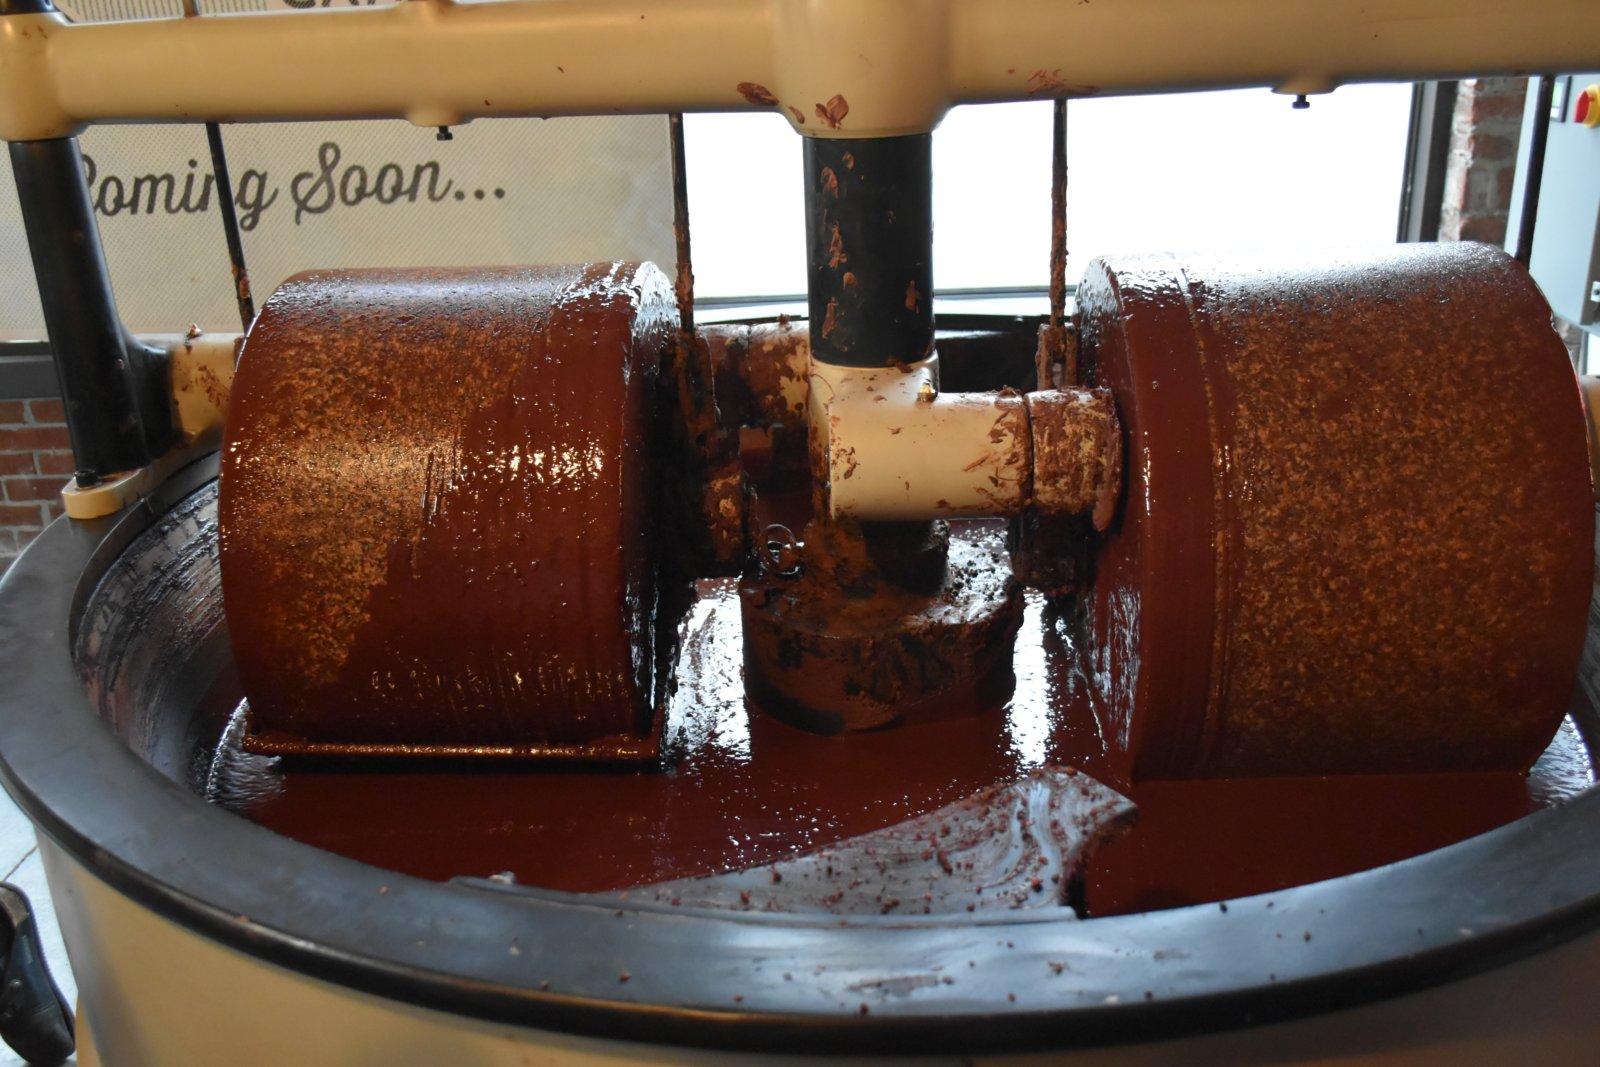 Tons of grinders make the nibs smooth, but it does not make them delicious.